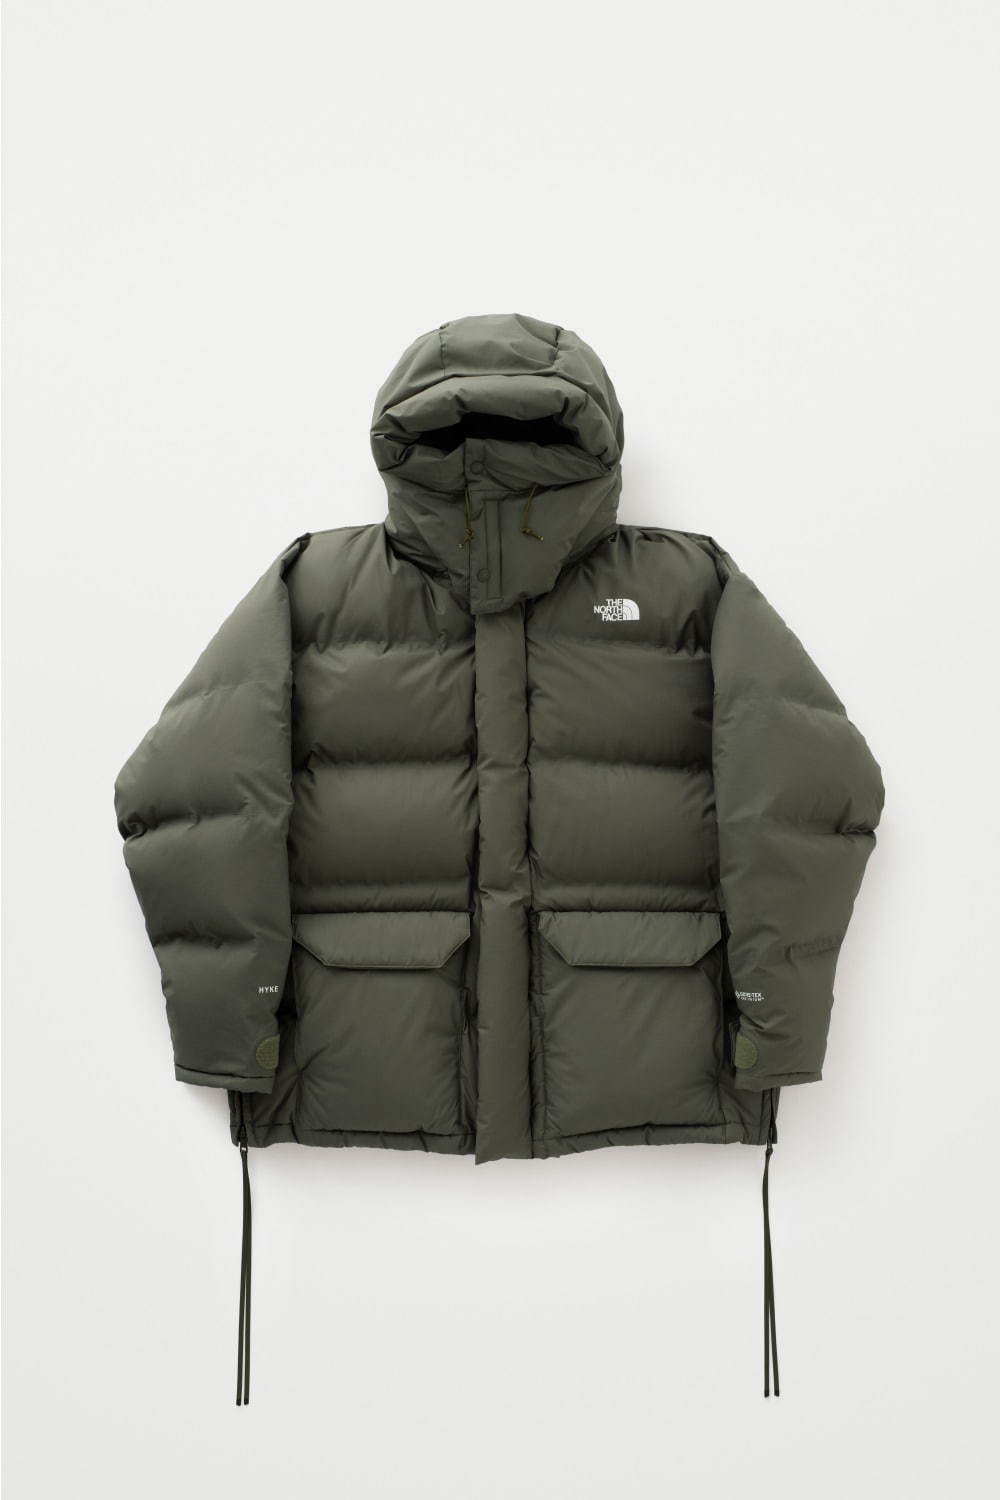 THE NORTH FACE ×ハイク HYKE WS Big Down